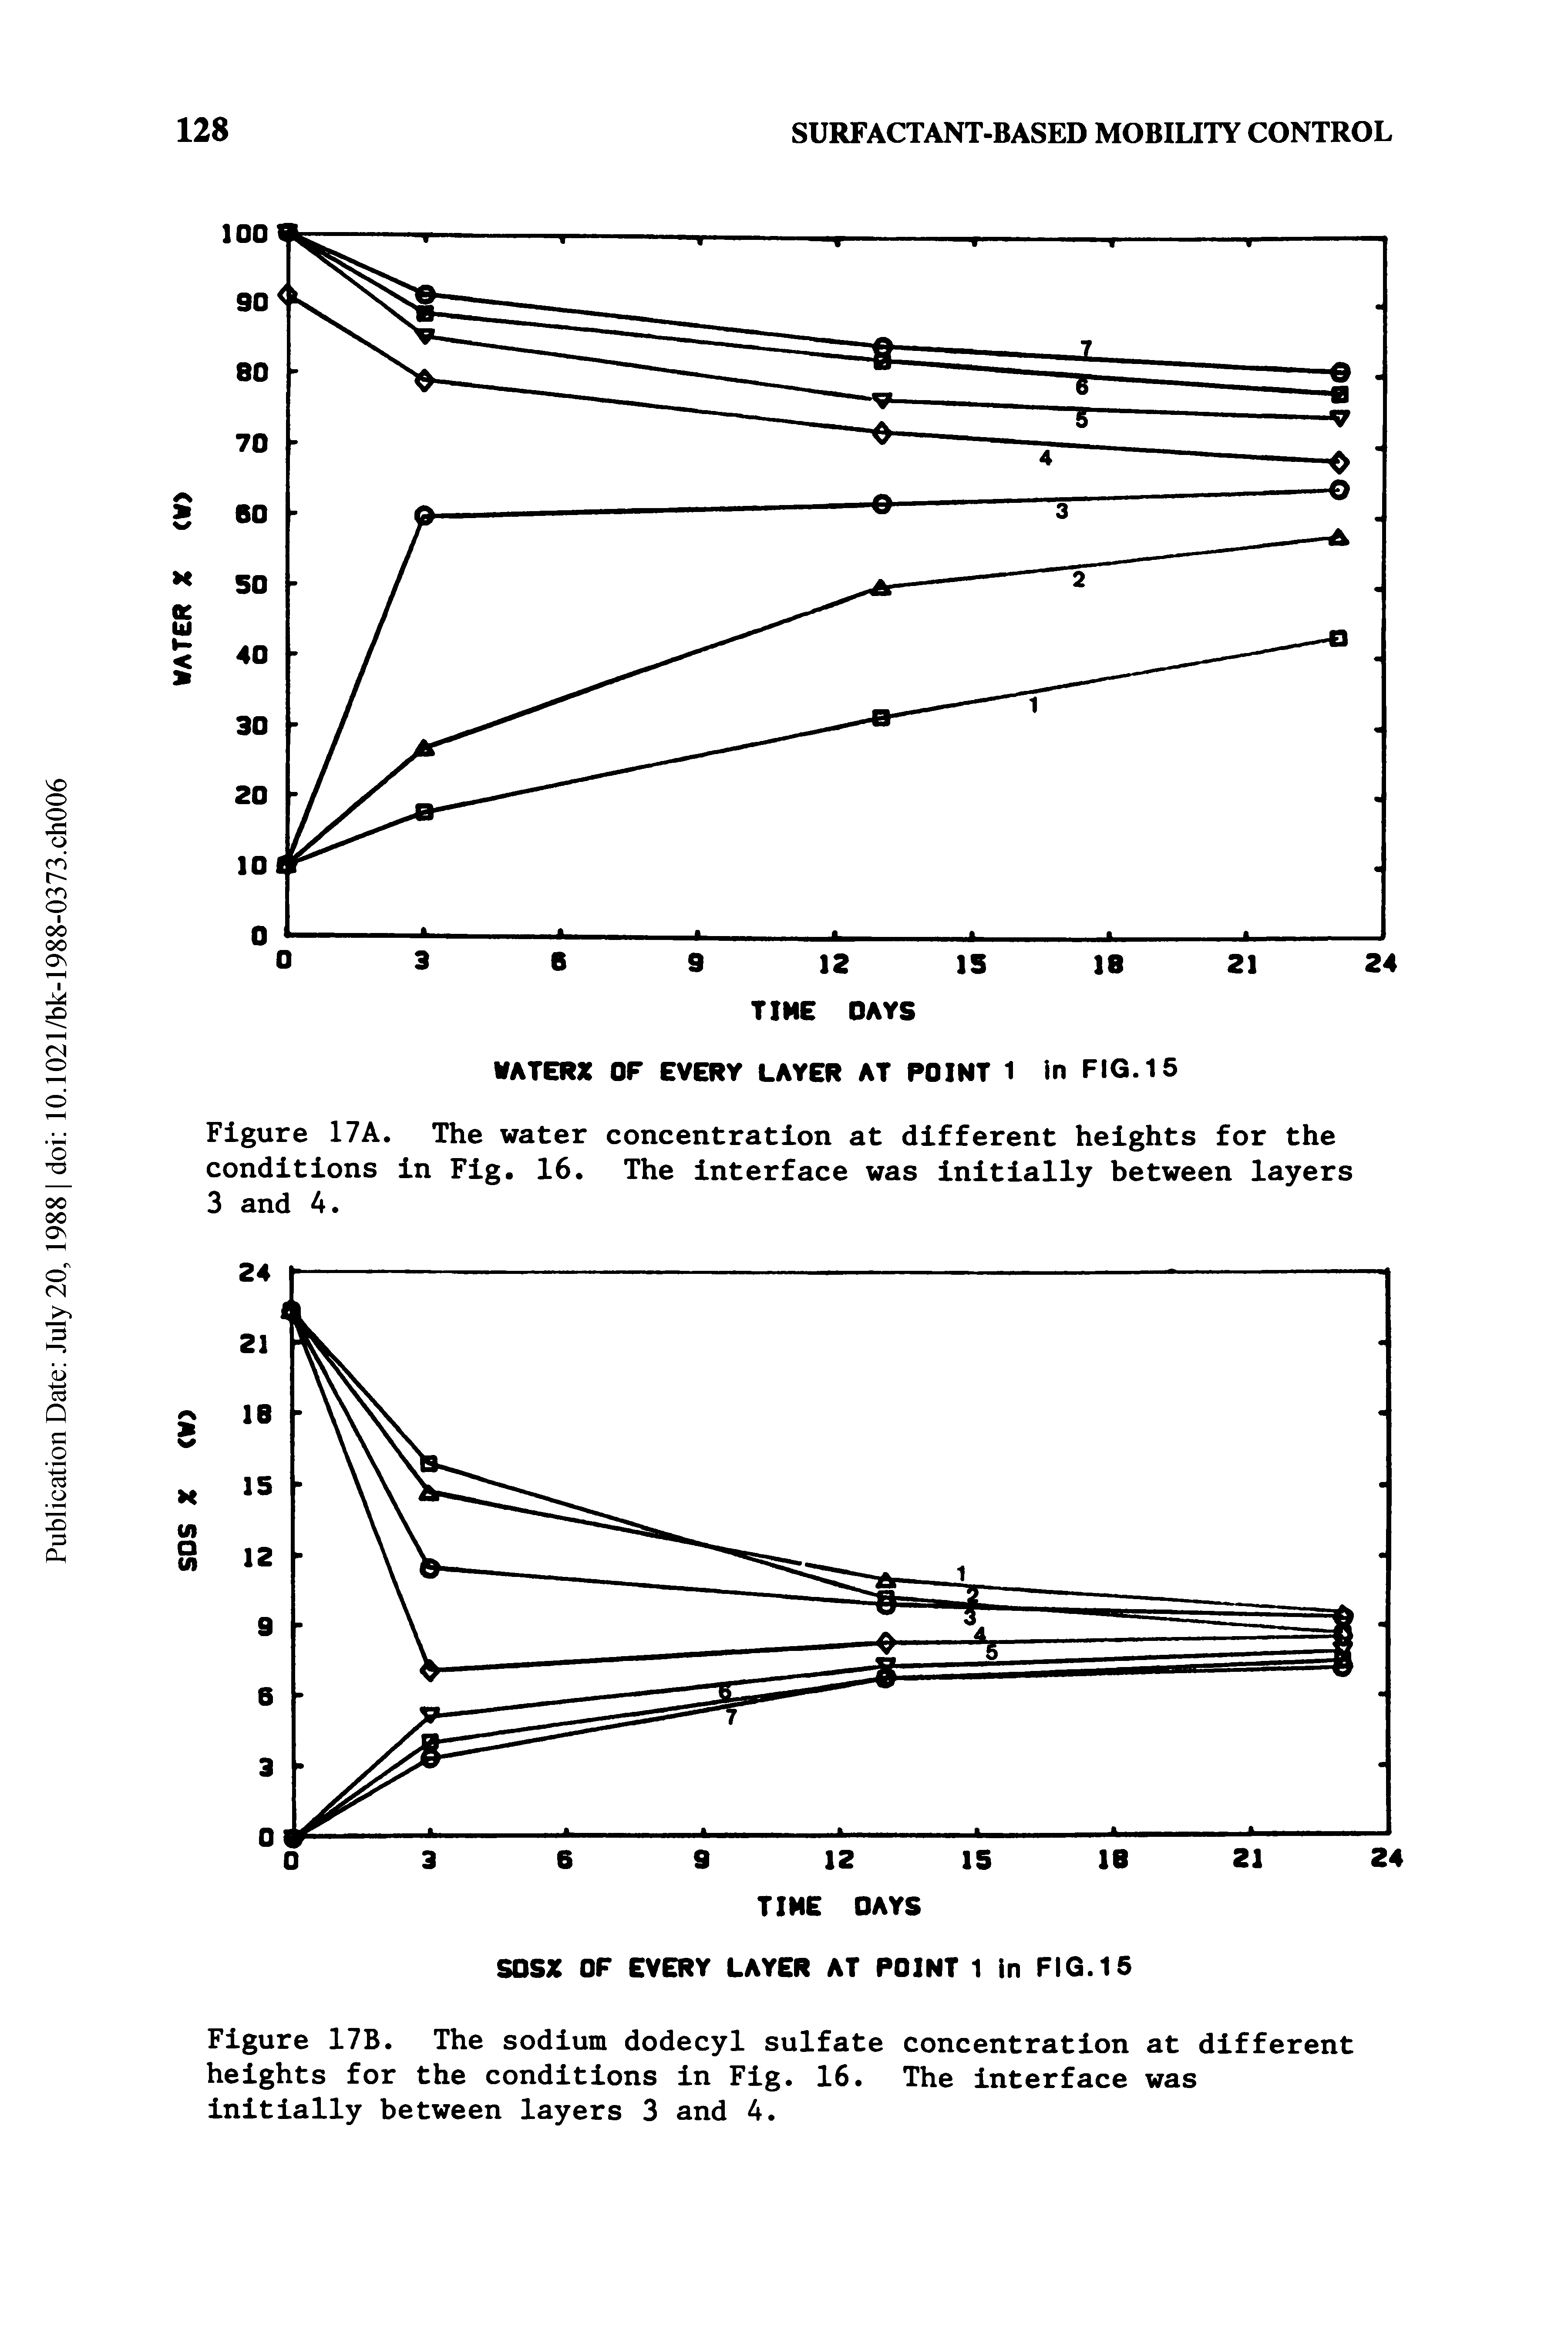 Figure 17B. The sodium dodecyl sulfate concentration at different heights for the conditions in Fig. 16. The interface was initially between layers 3 and 4.